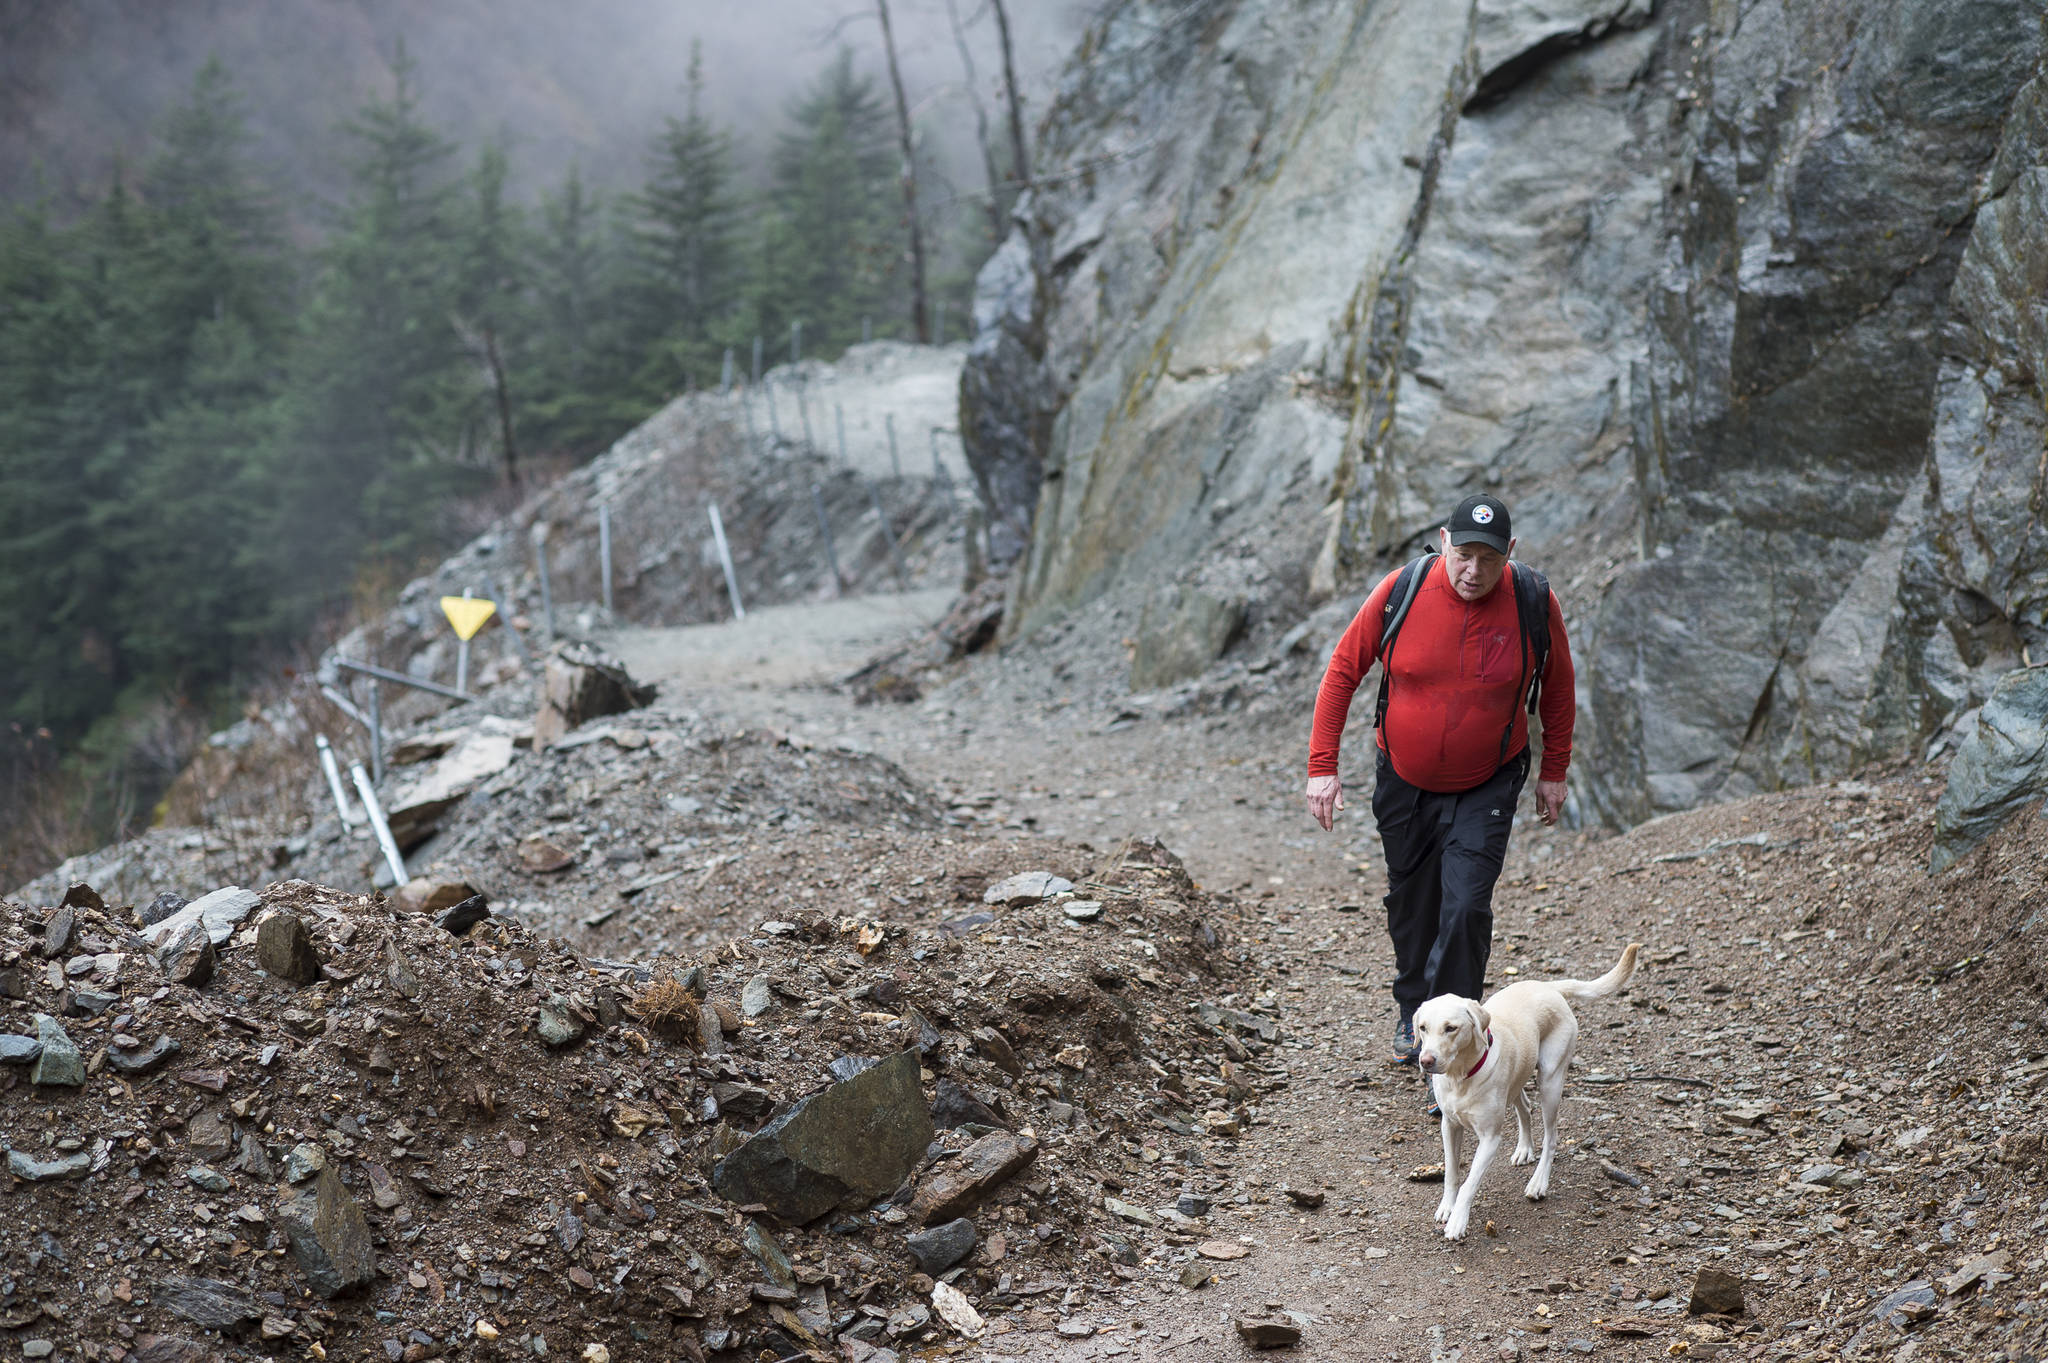 Andy Smoker hikes up Perseverance Trail with his dog, Linda, on Friday, Nov. 9, 2018. Work was completed recently to clear rock and debris along the trail. (Michael Penn | Juneau Empire)